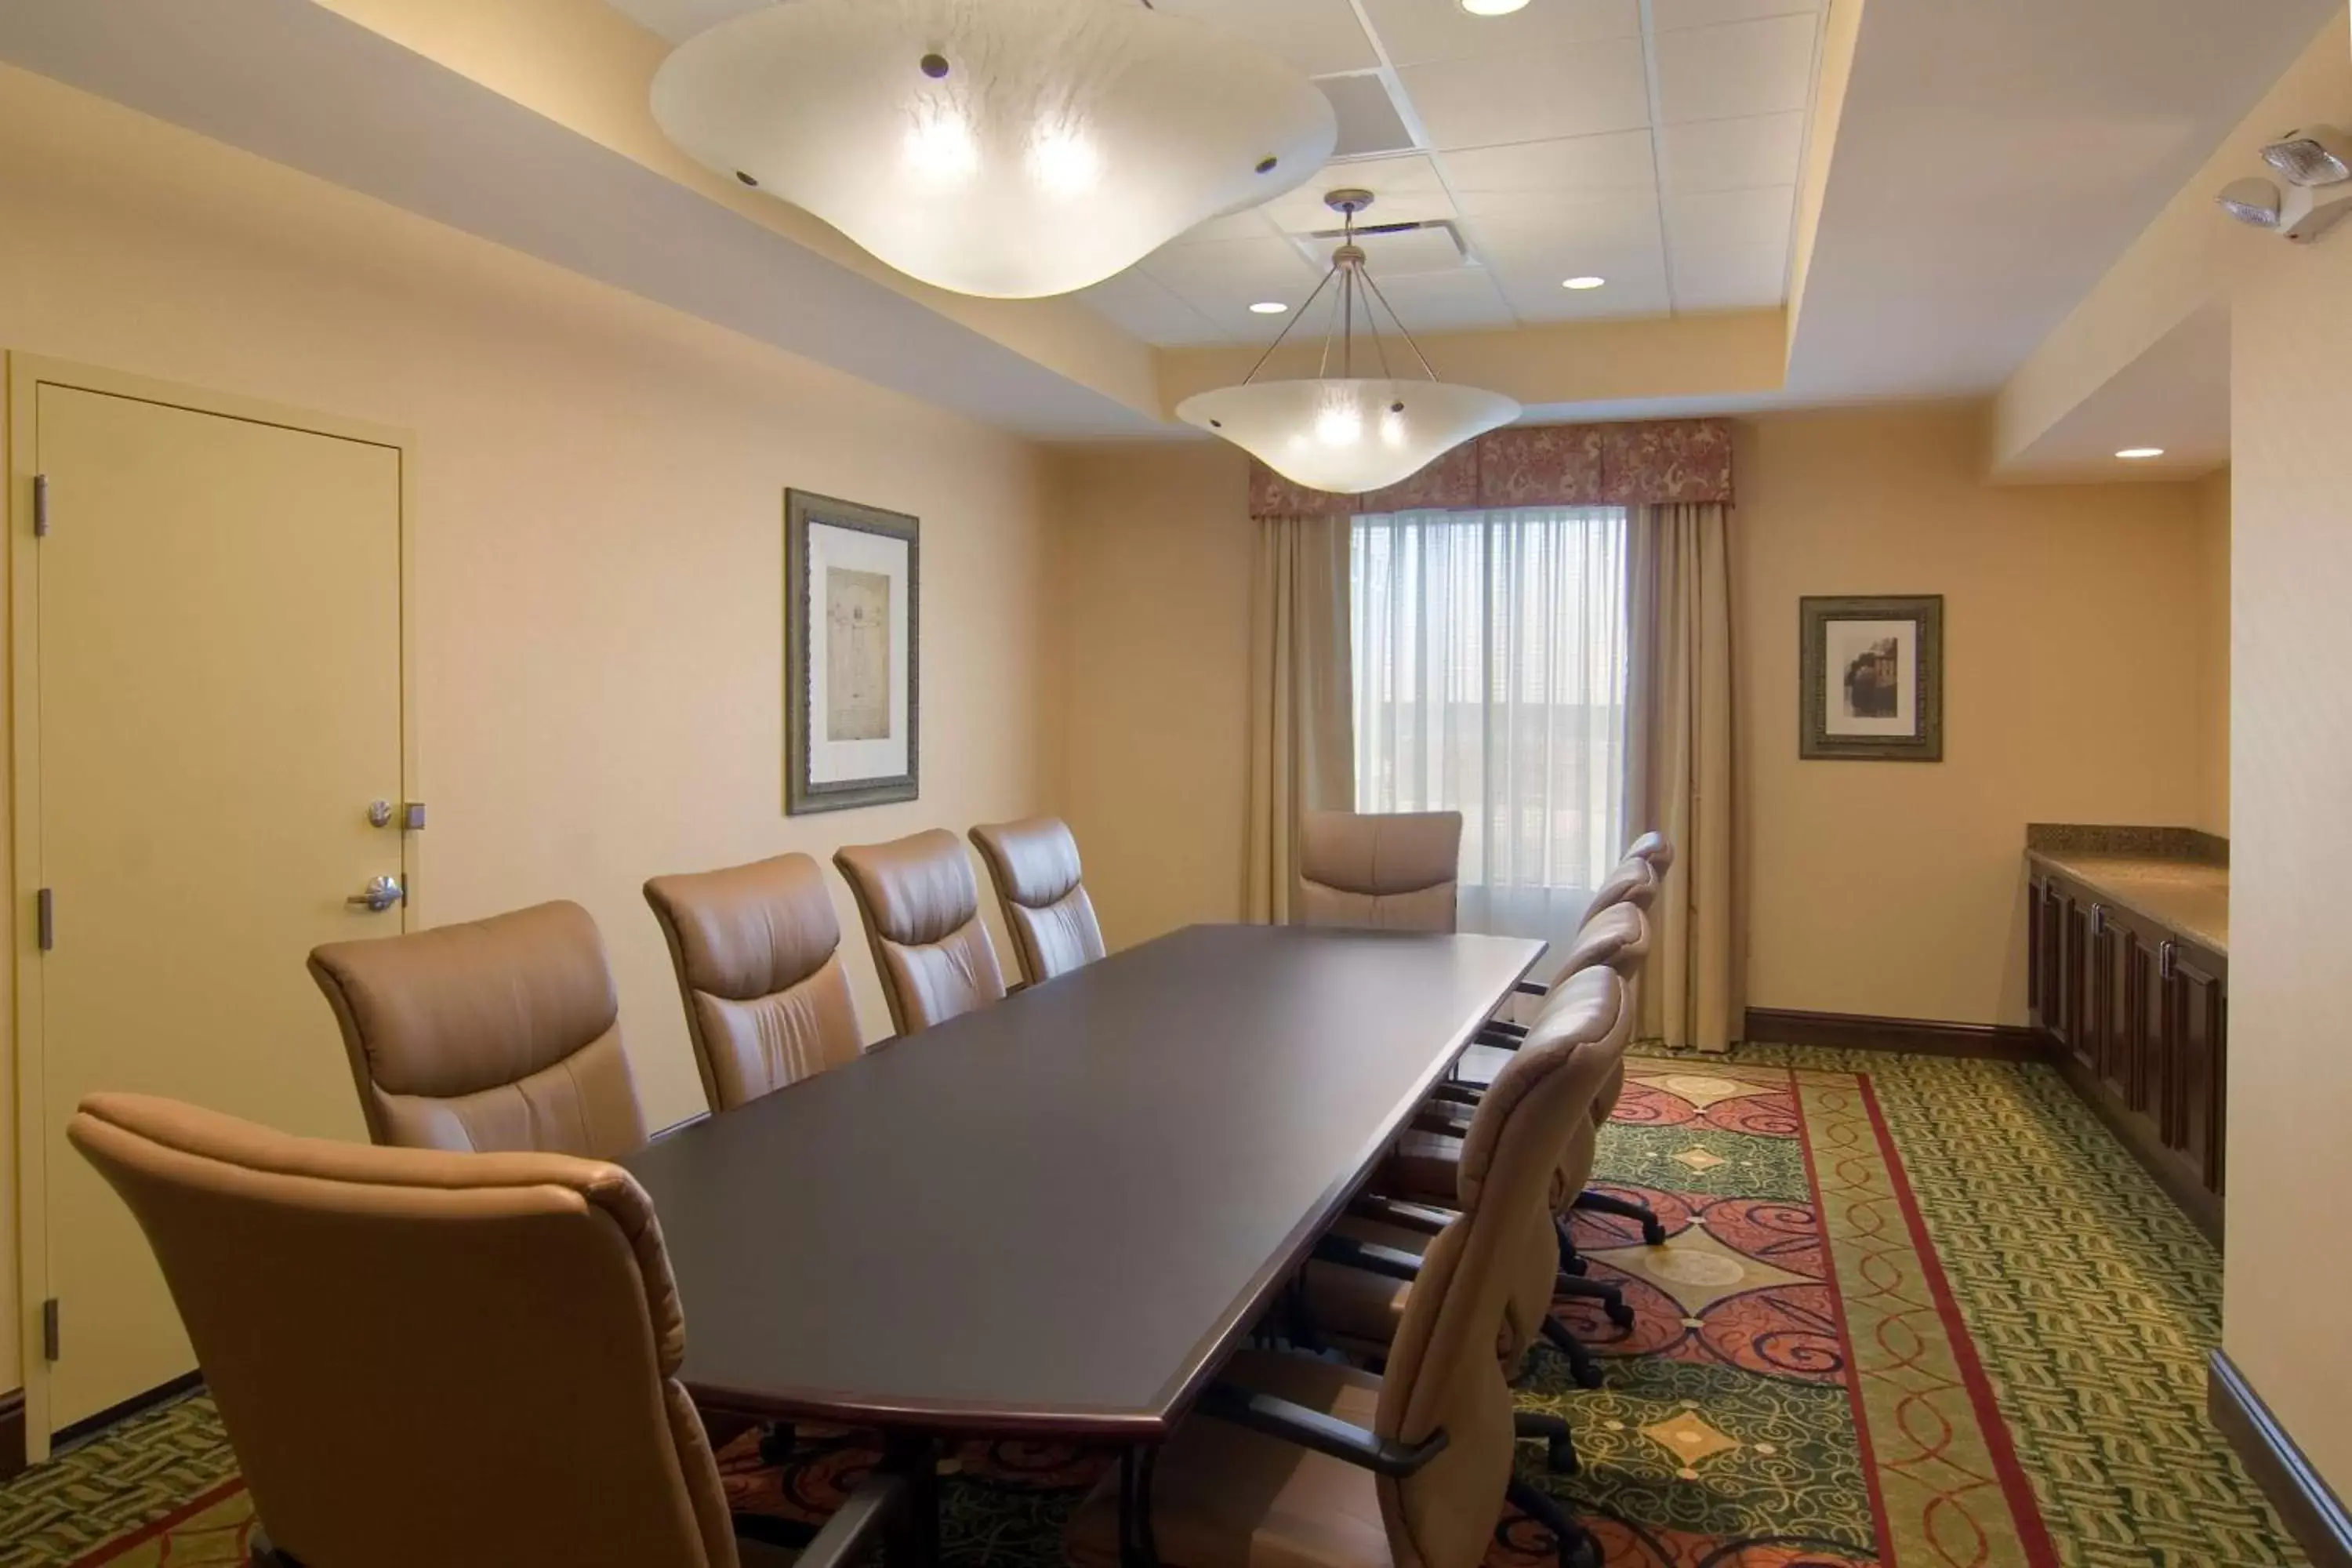 Meeting/conference room in Hilton Garden Inn Cleveland East / Mayfield Village